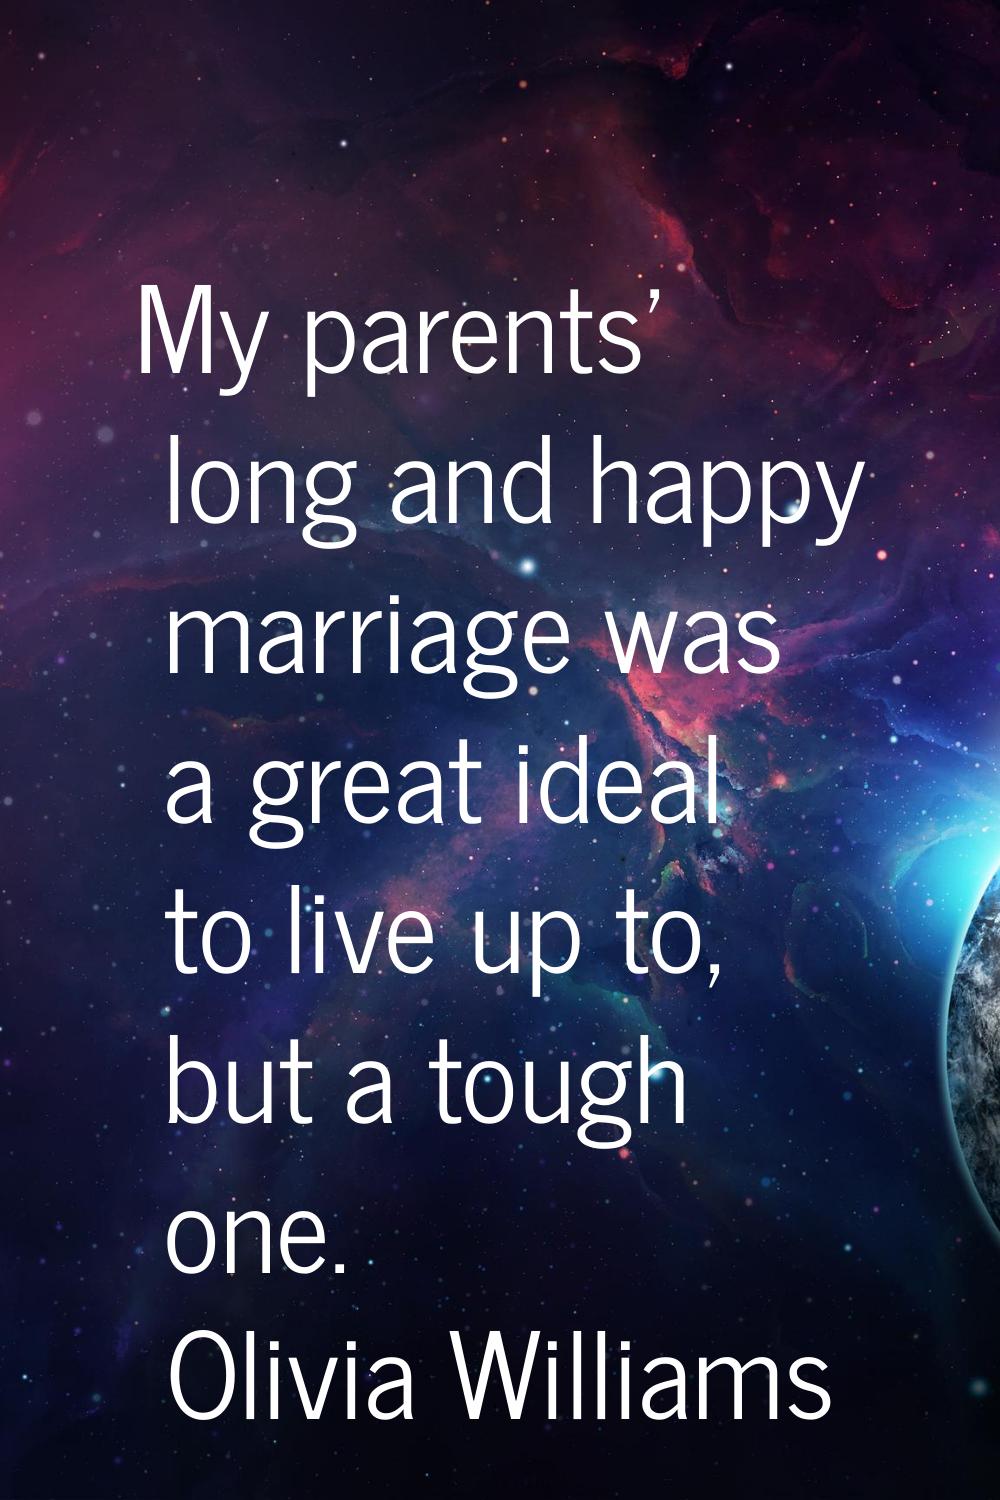 My parents' long and happy marriage was a great ideal to live up to, but a tough one.